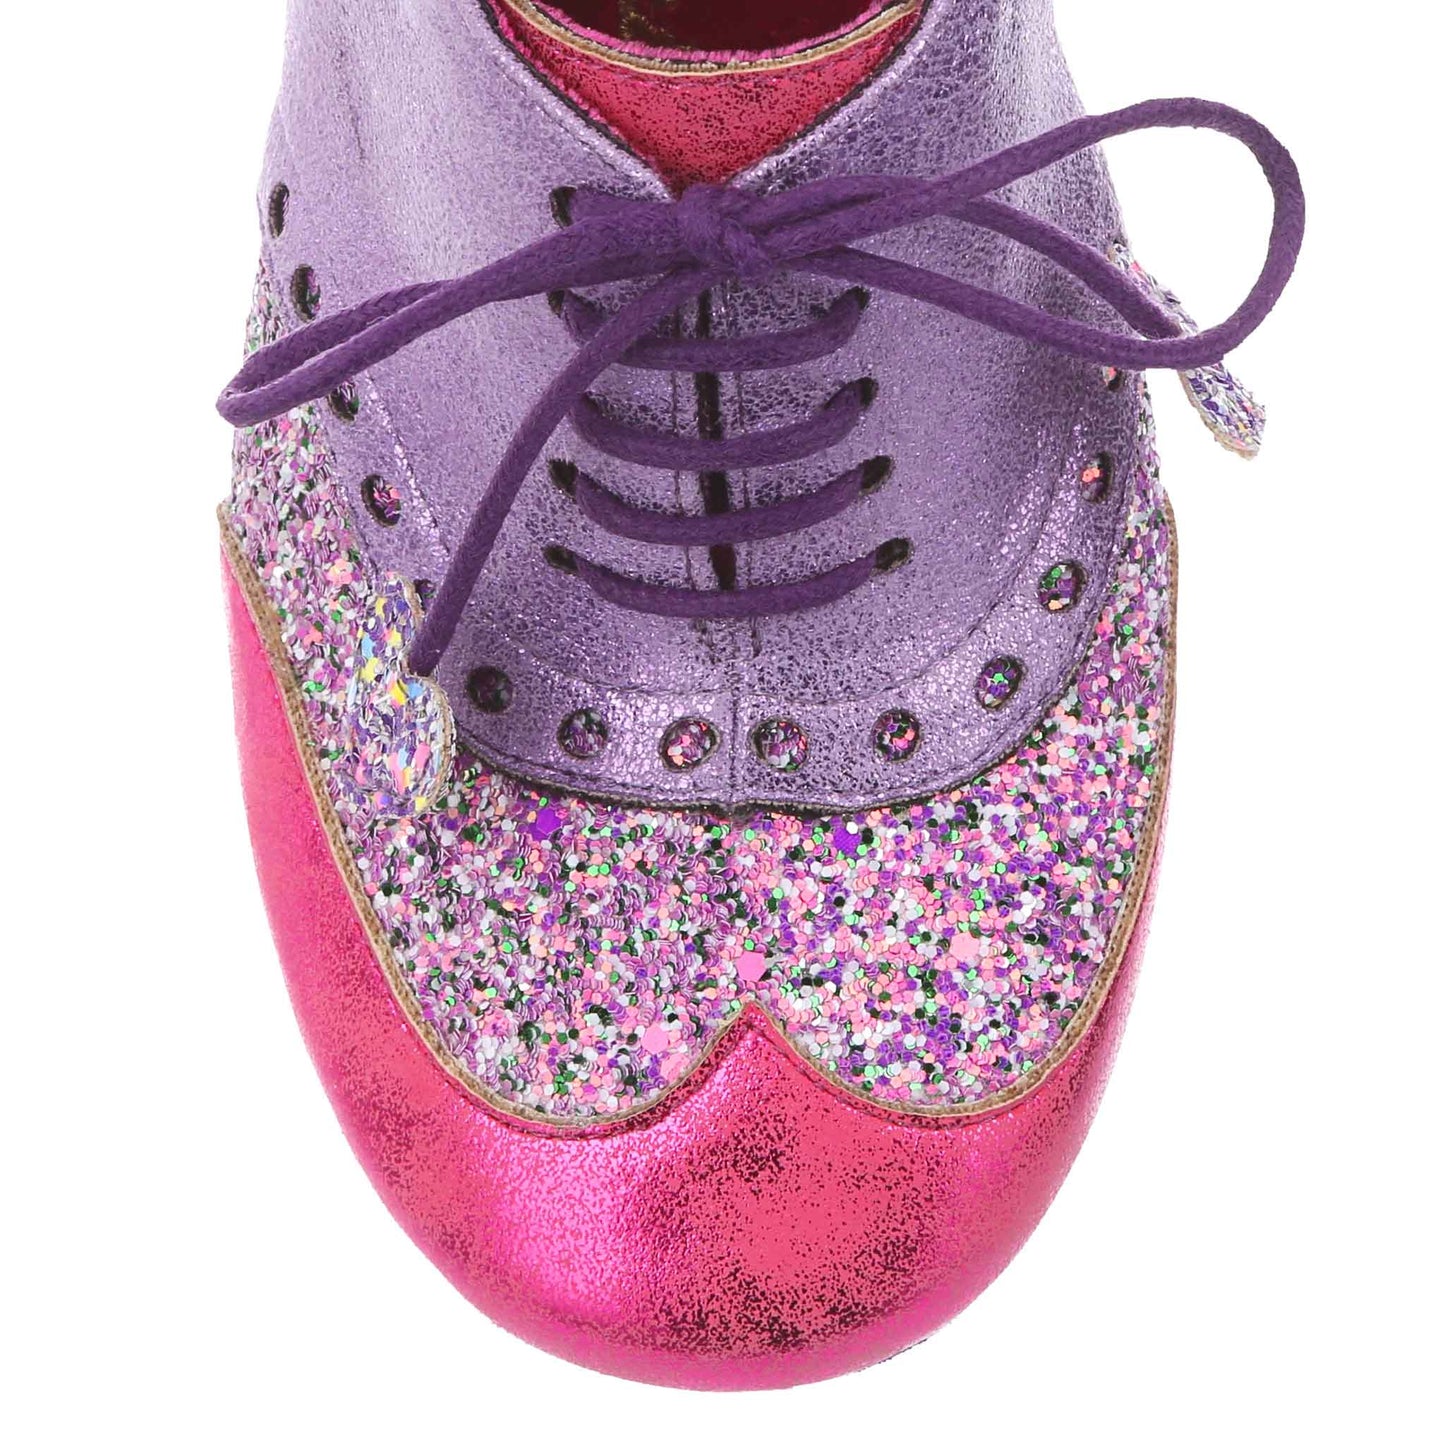 Irregular Choice Women's Clara Bow 3908-08 AG Lace Up Shoes Pink Lavender